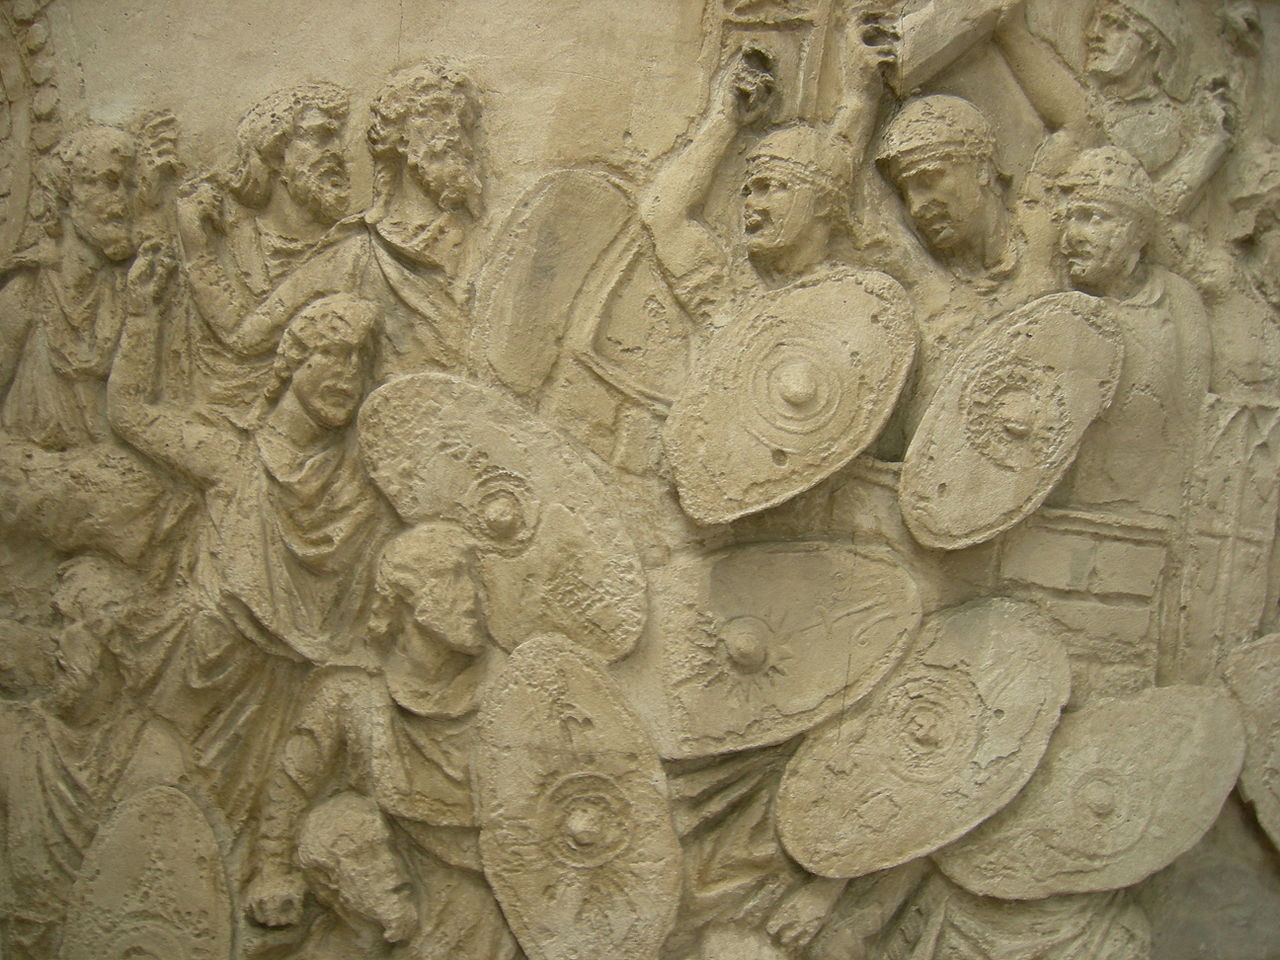 Battle scene: The Dacians (on the left) are attacking Trajan's men. This is from the plaster-cast reproduction at the Museum of Romanian History in Bucharest, Romania